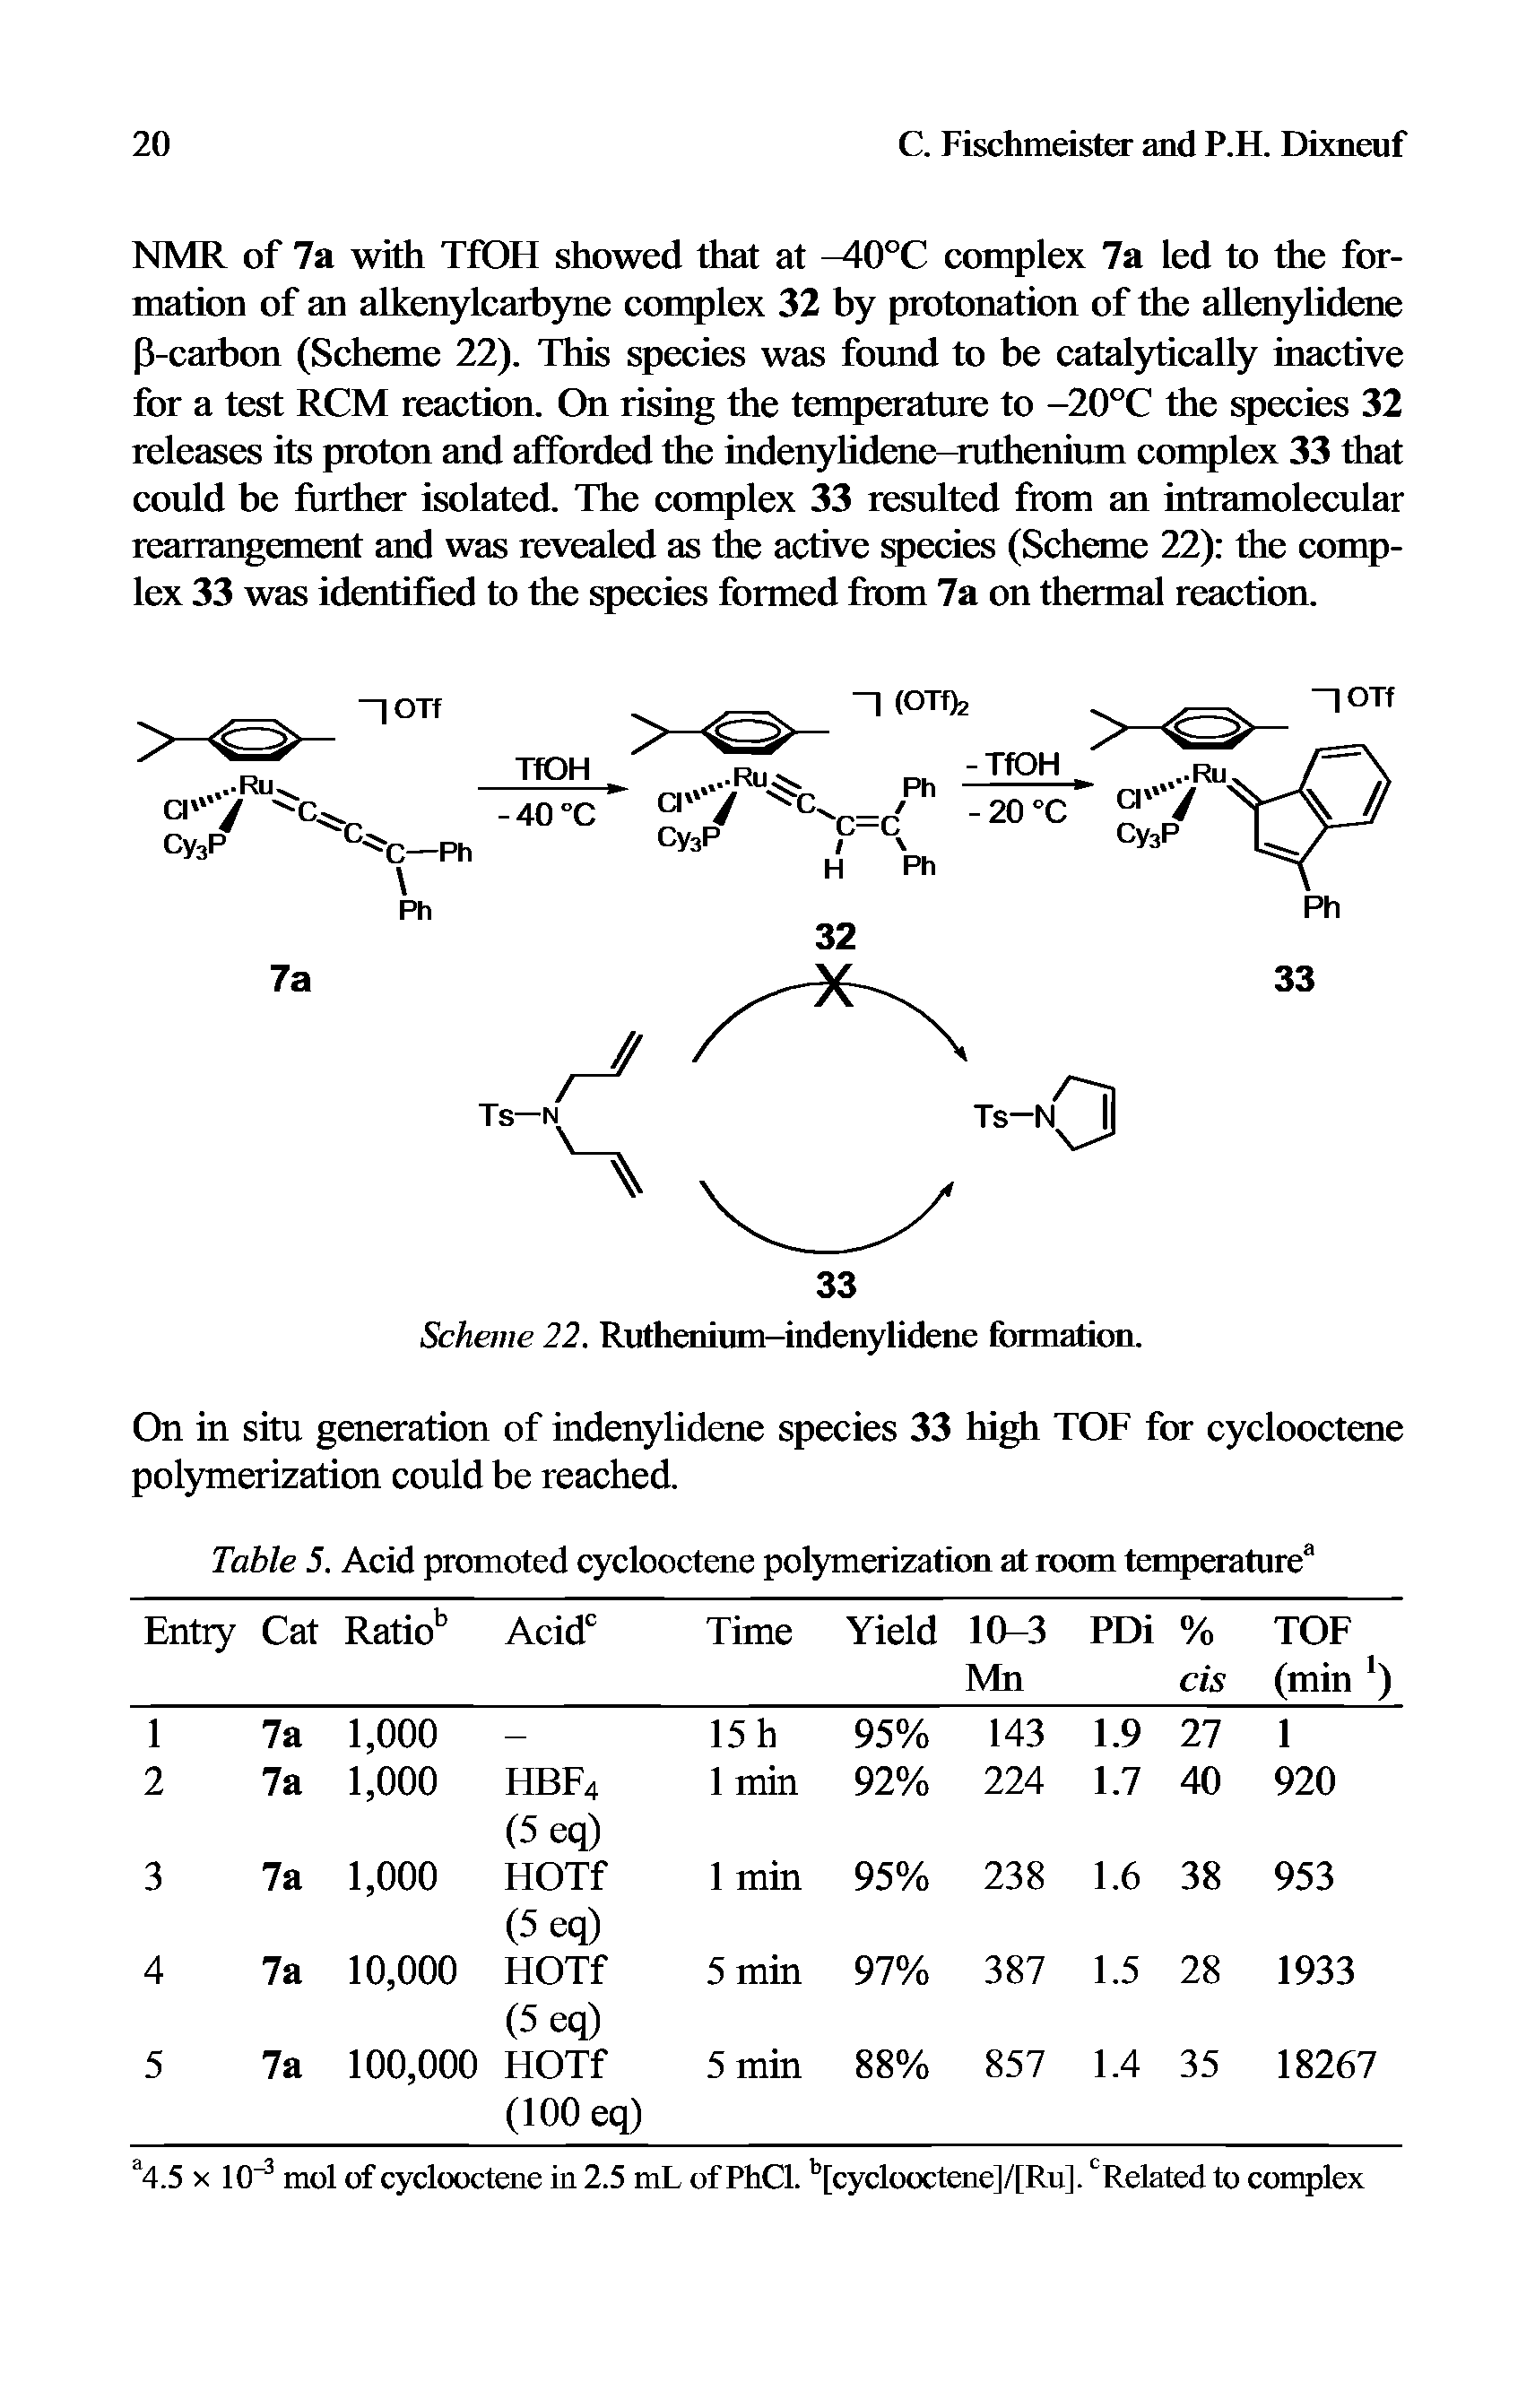 Table 5. Acid promoted cyclooctene polymerization at room temperature ...